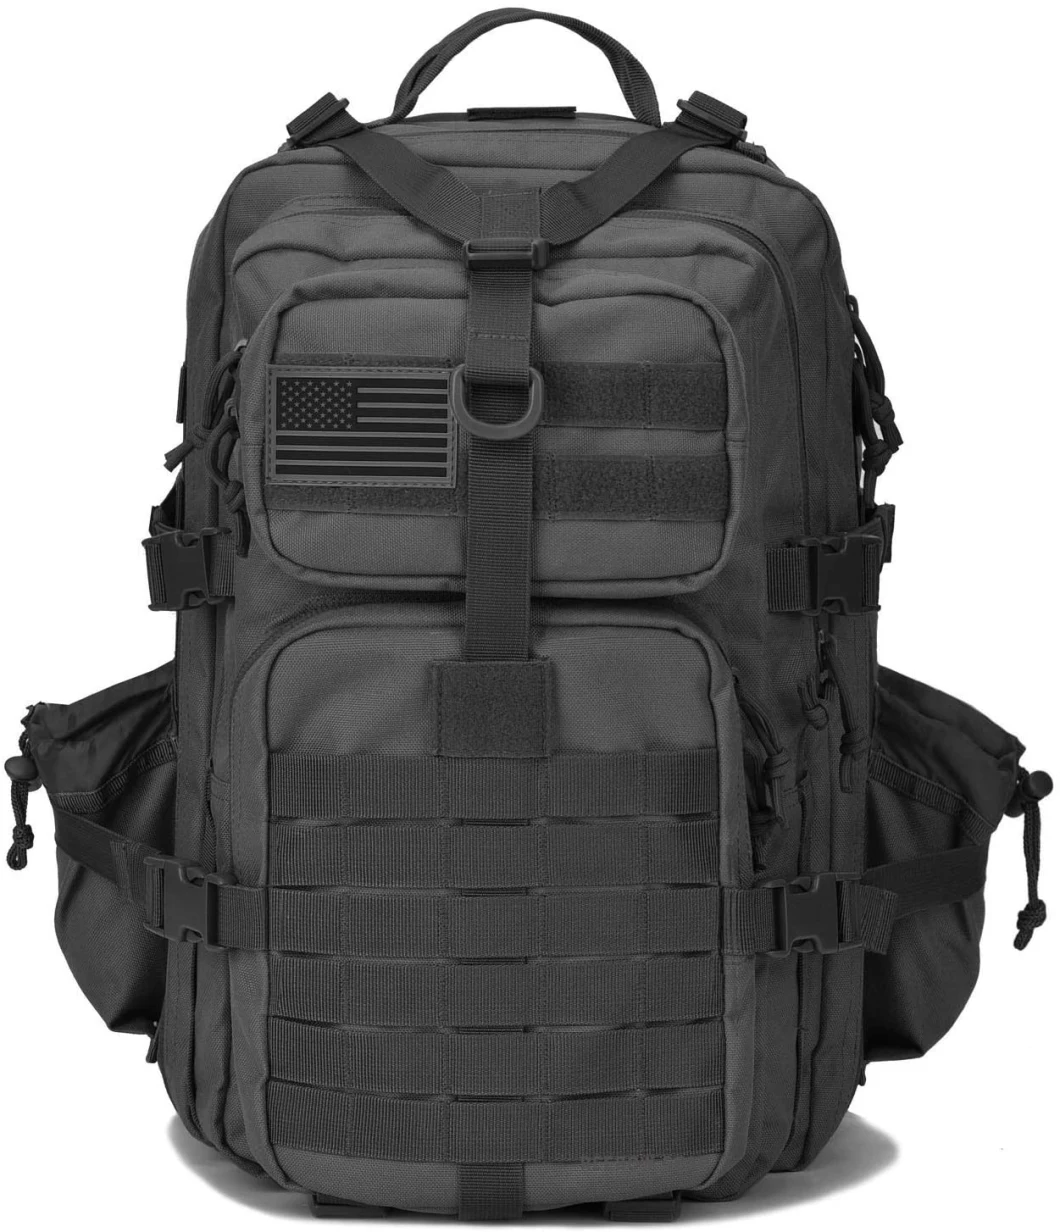 Military Backpack 3 Day Assault Pack Army Molle Bag Backpacks